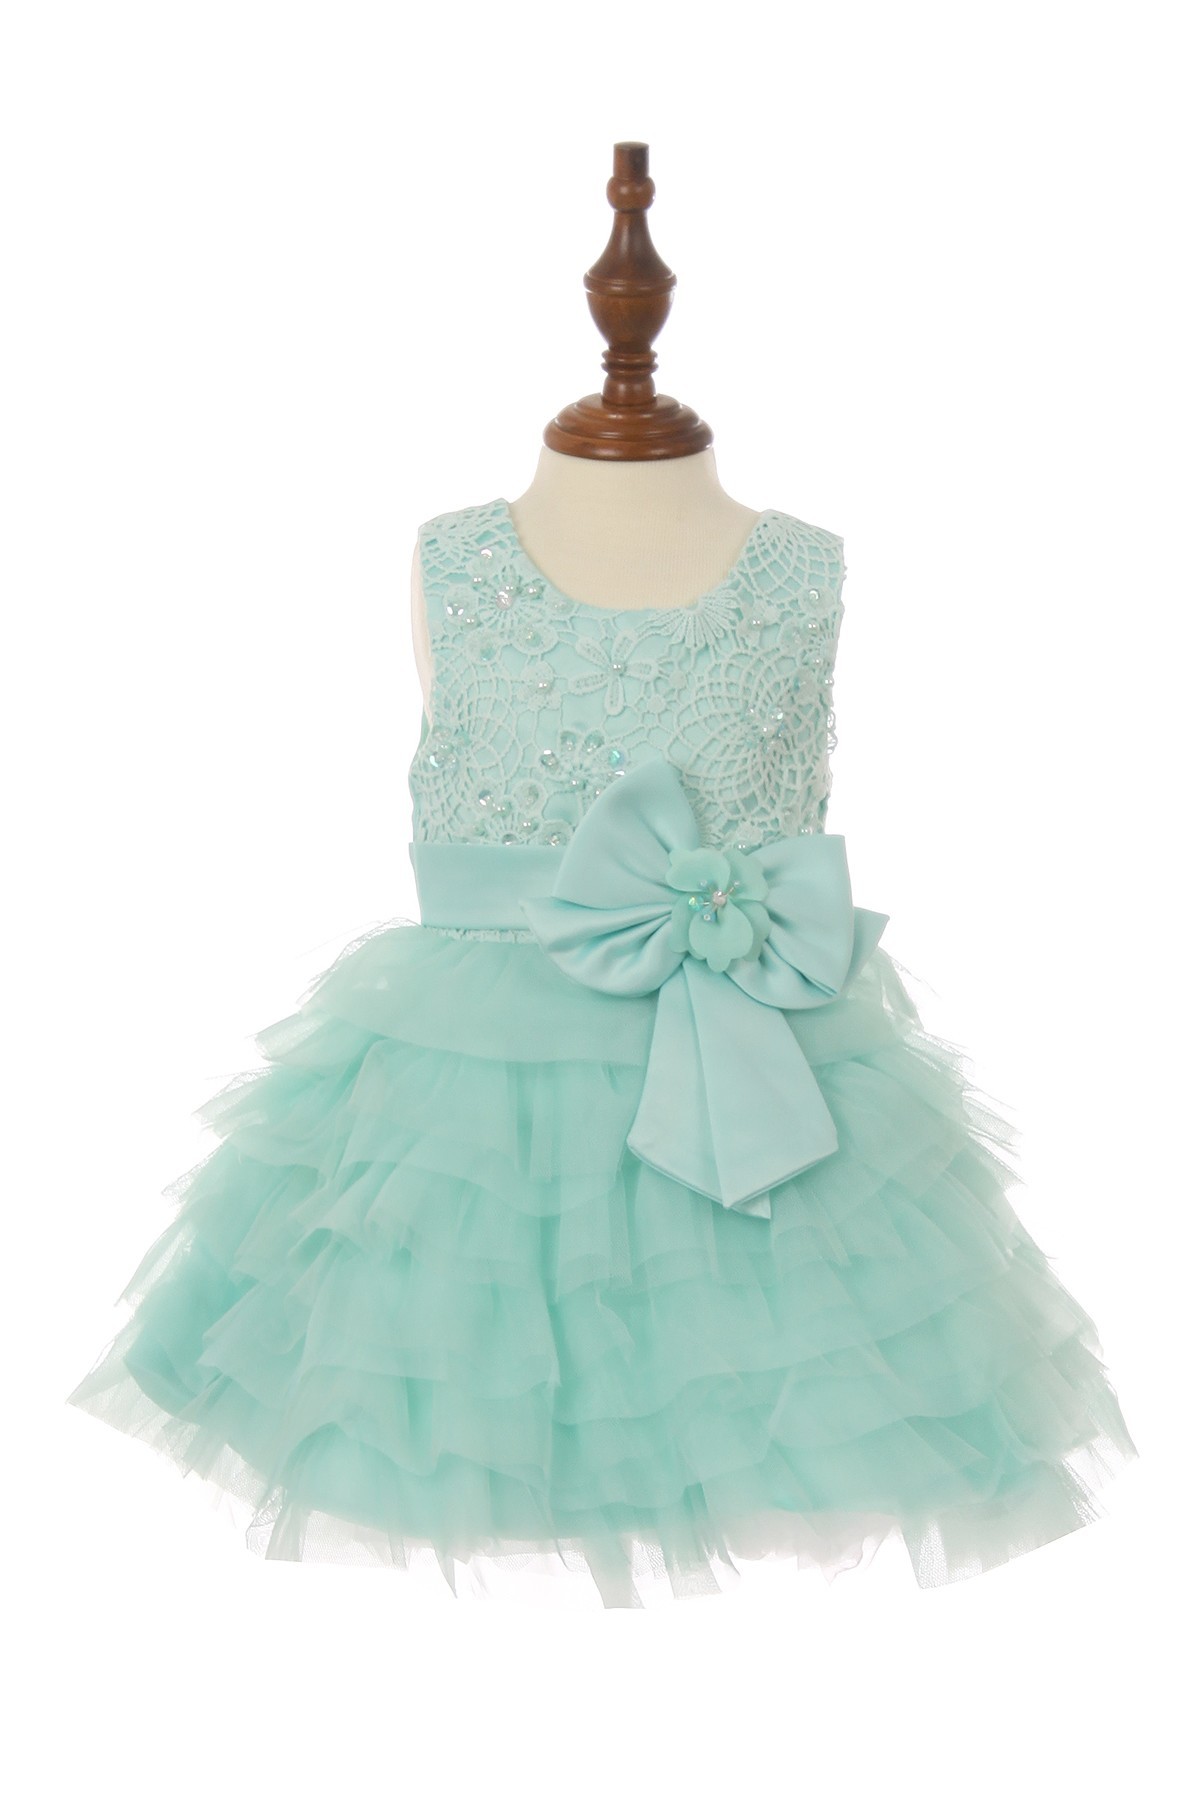 Baby dress with bow, and rows of ruffles